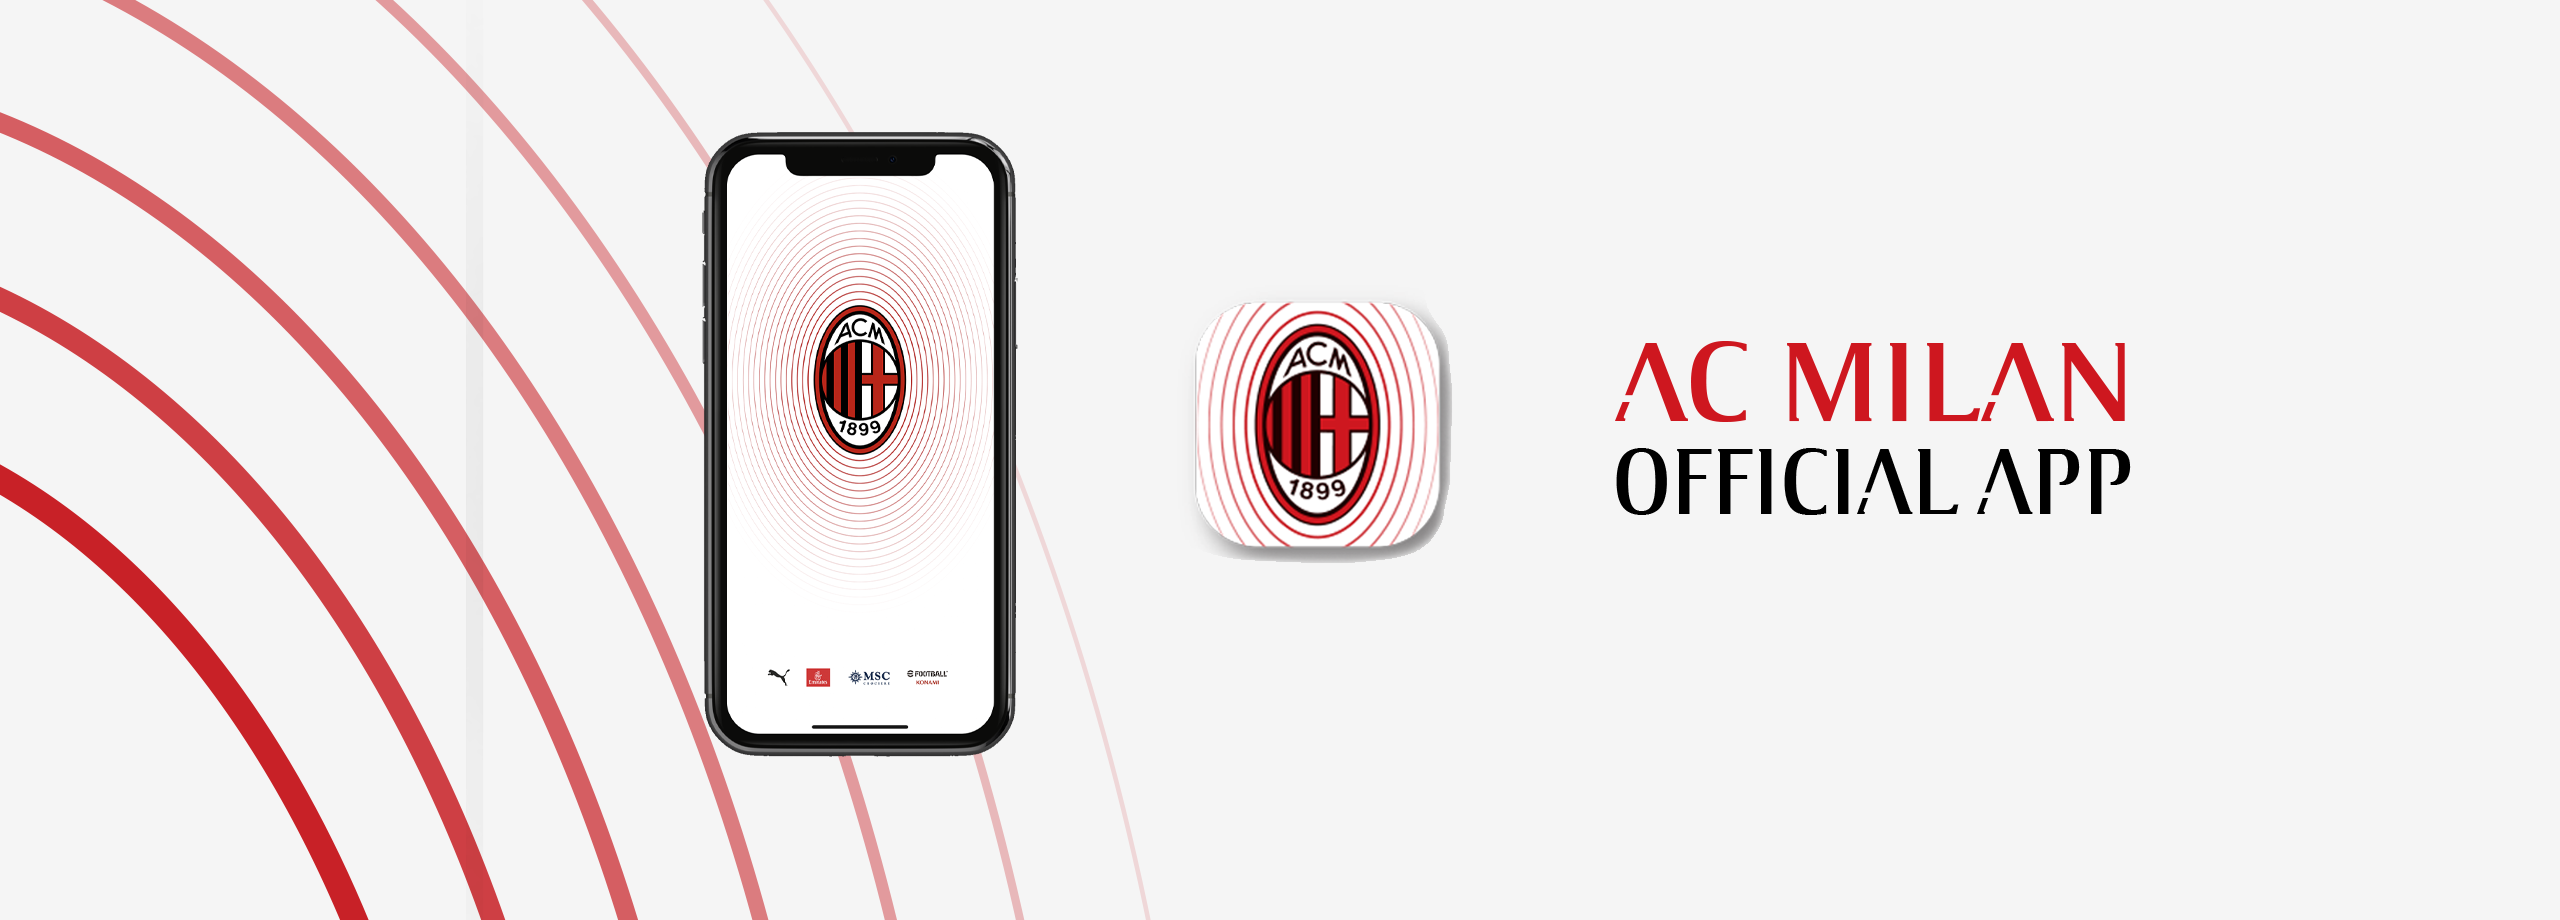 AC Milan Official App - Apps on Google Play